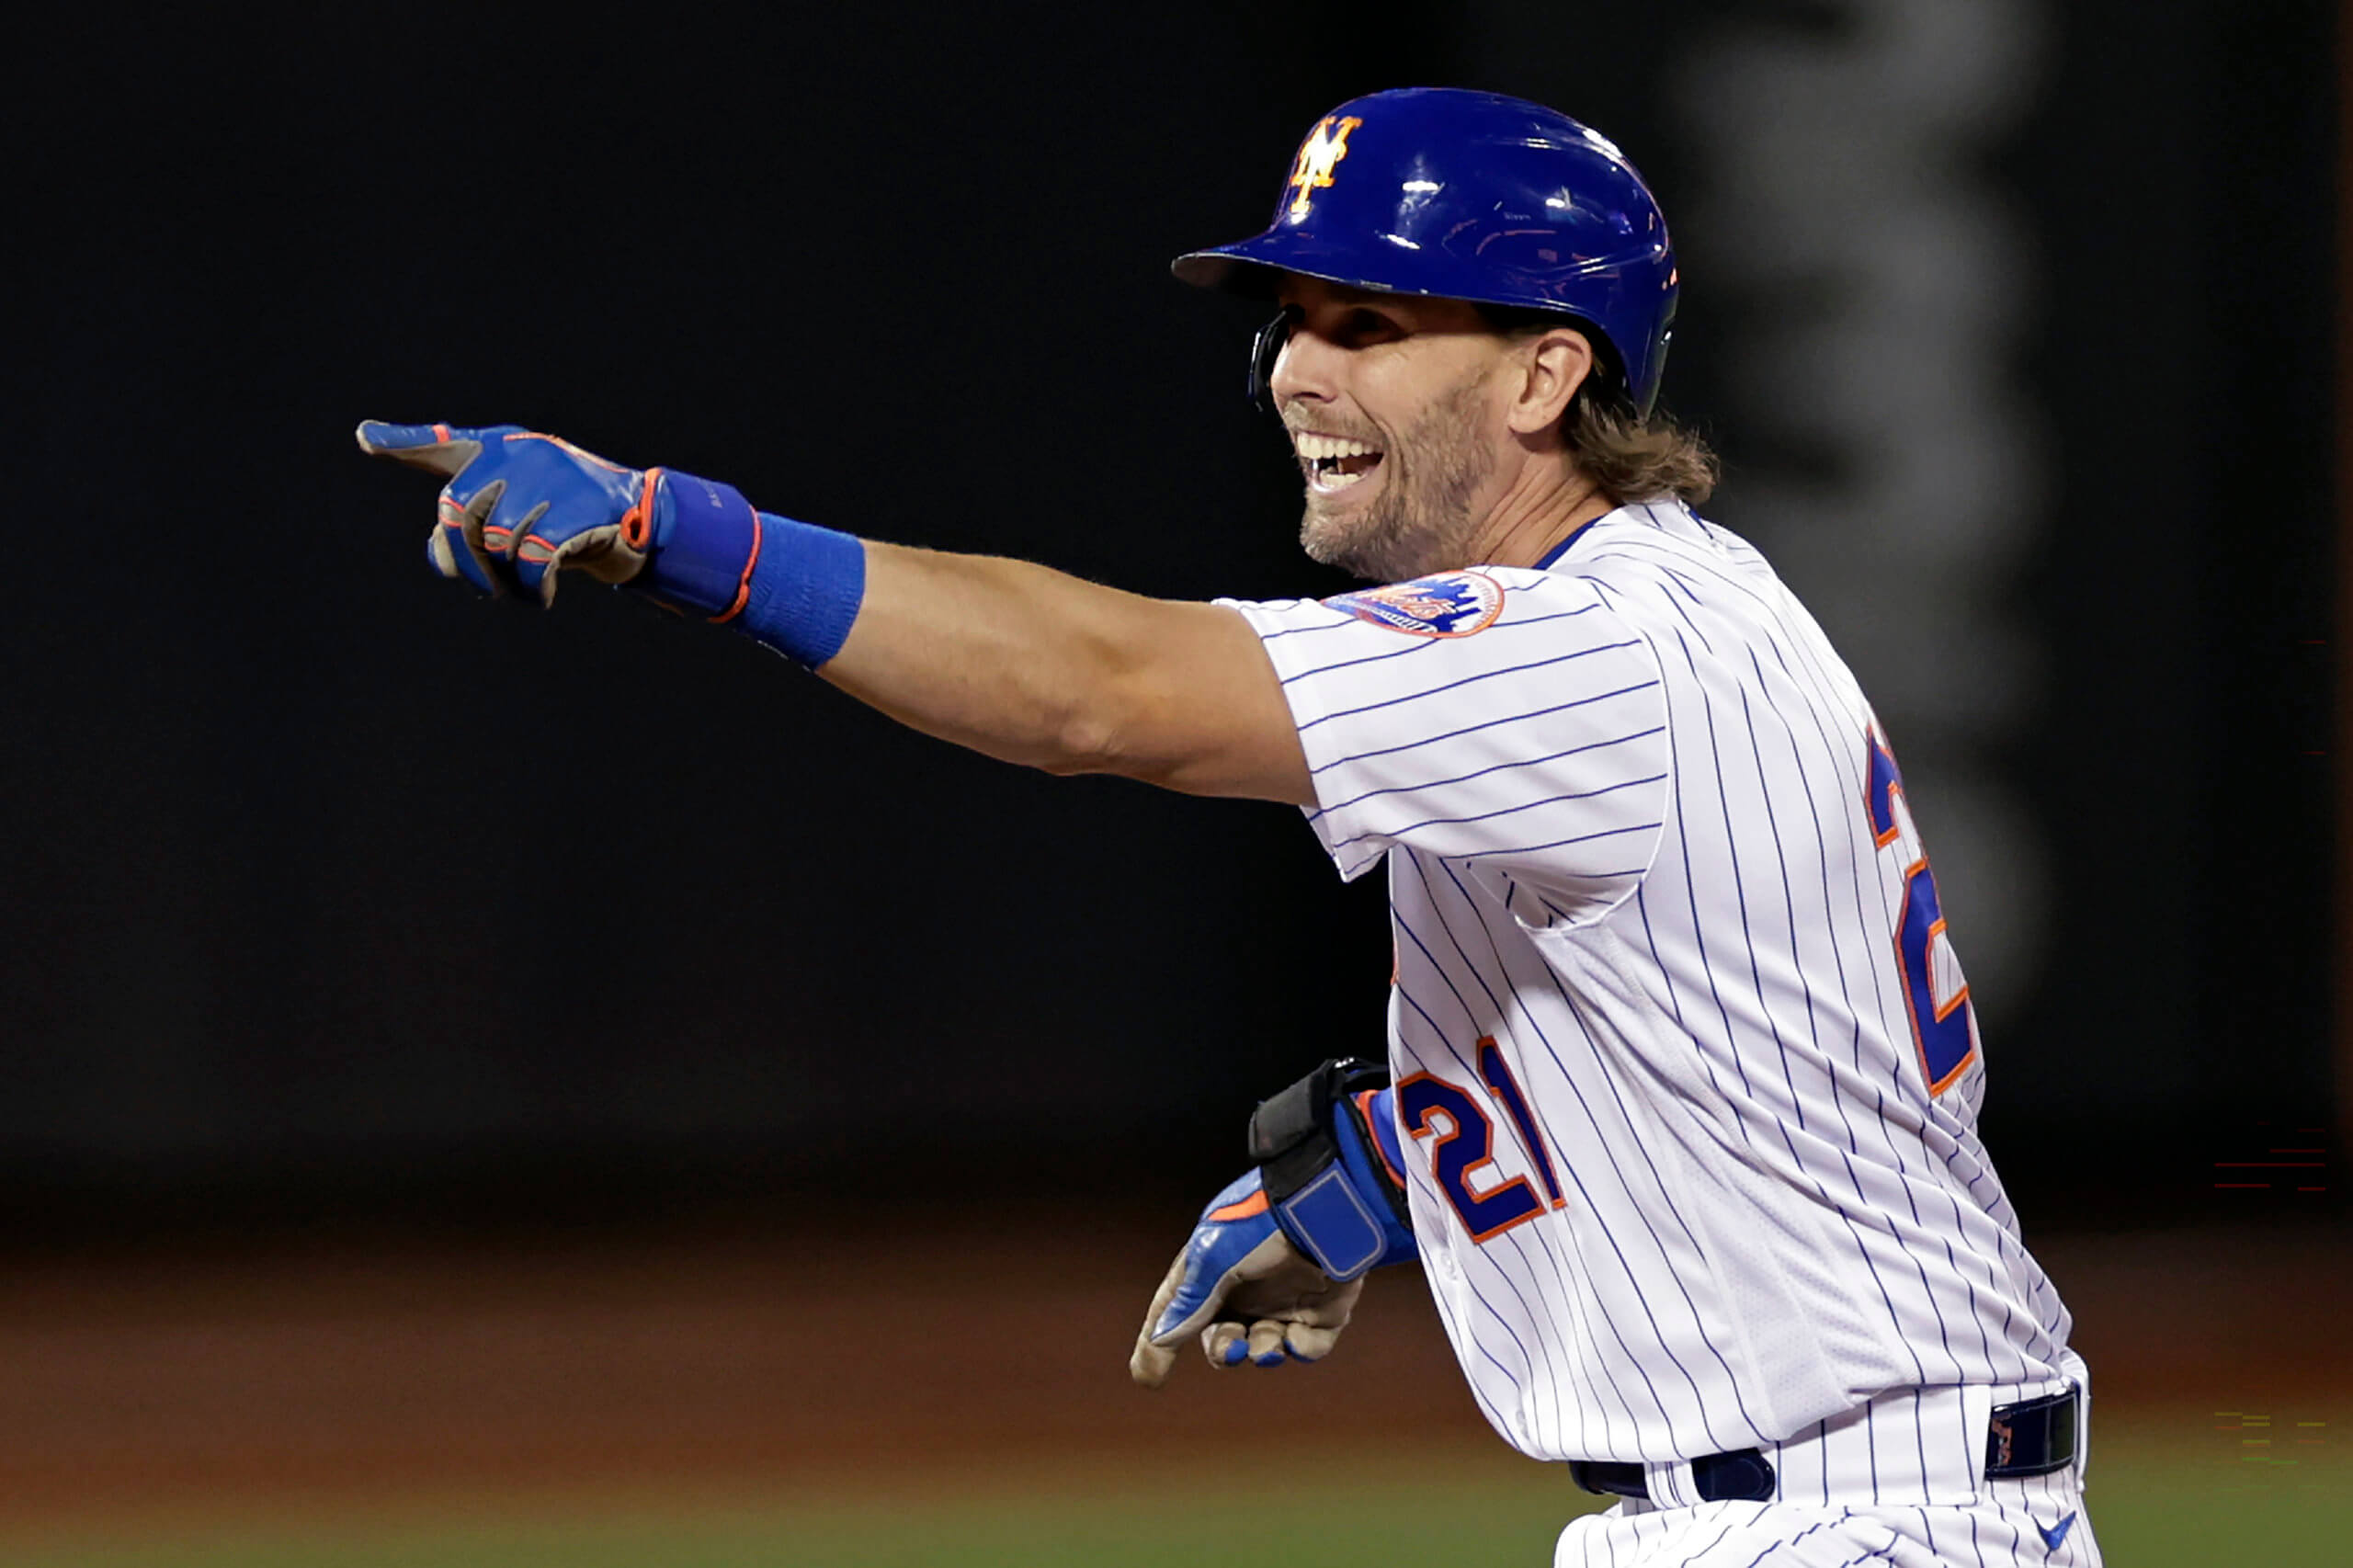 Jeff McNeil, the National League Batting champion and New York